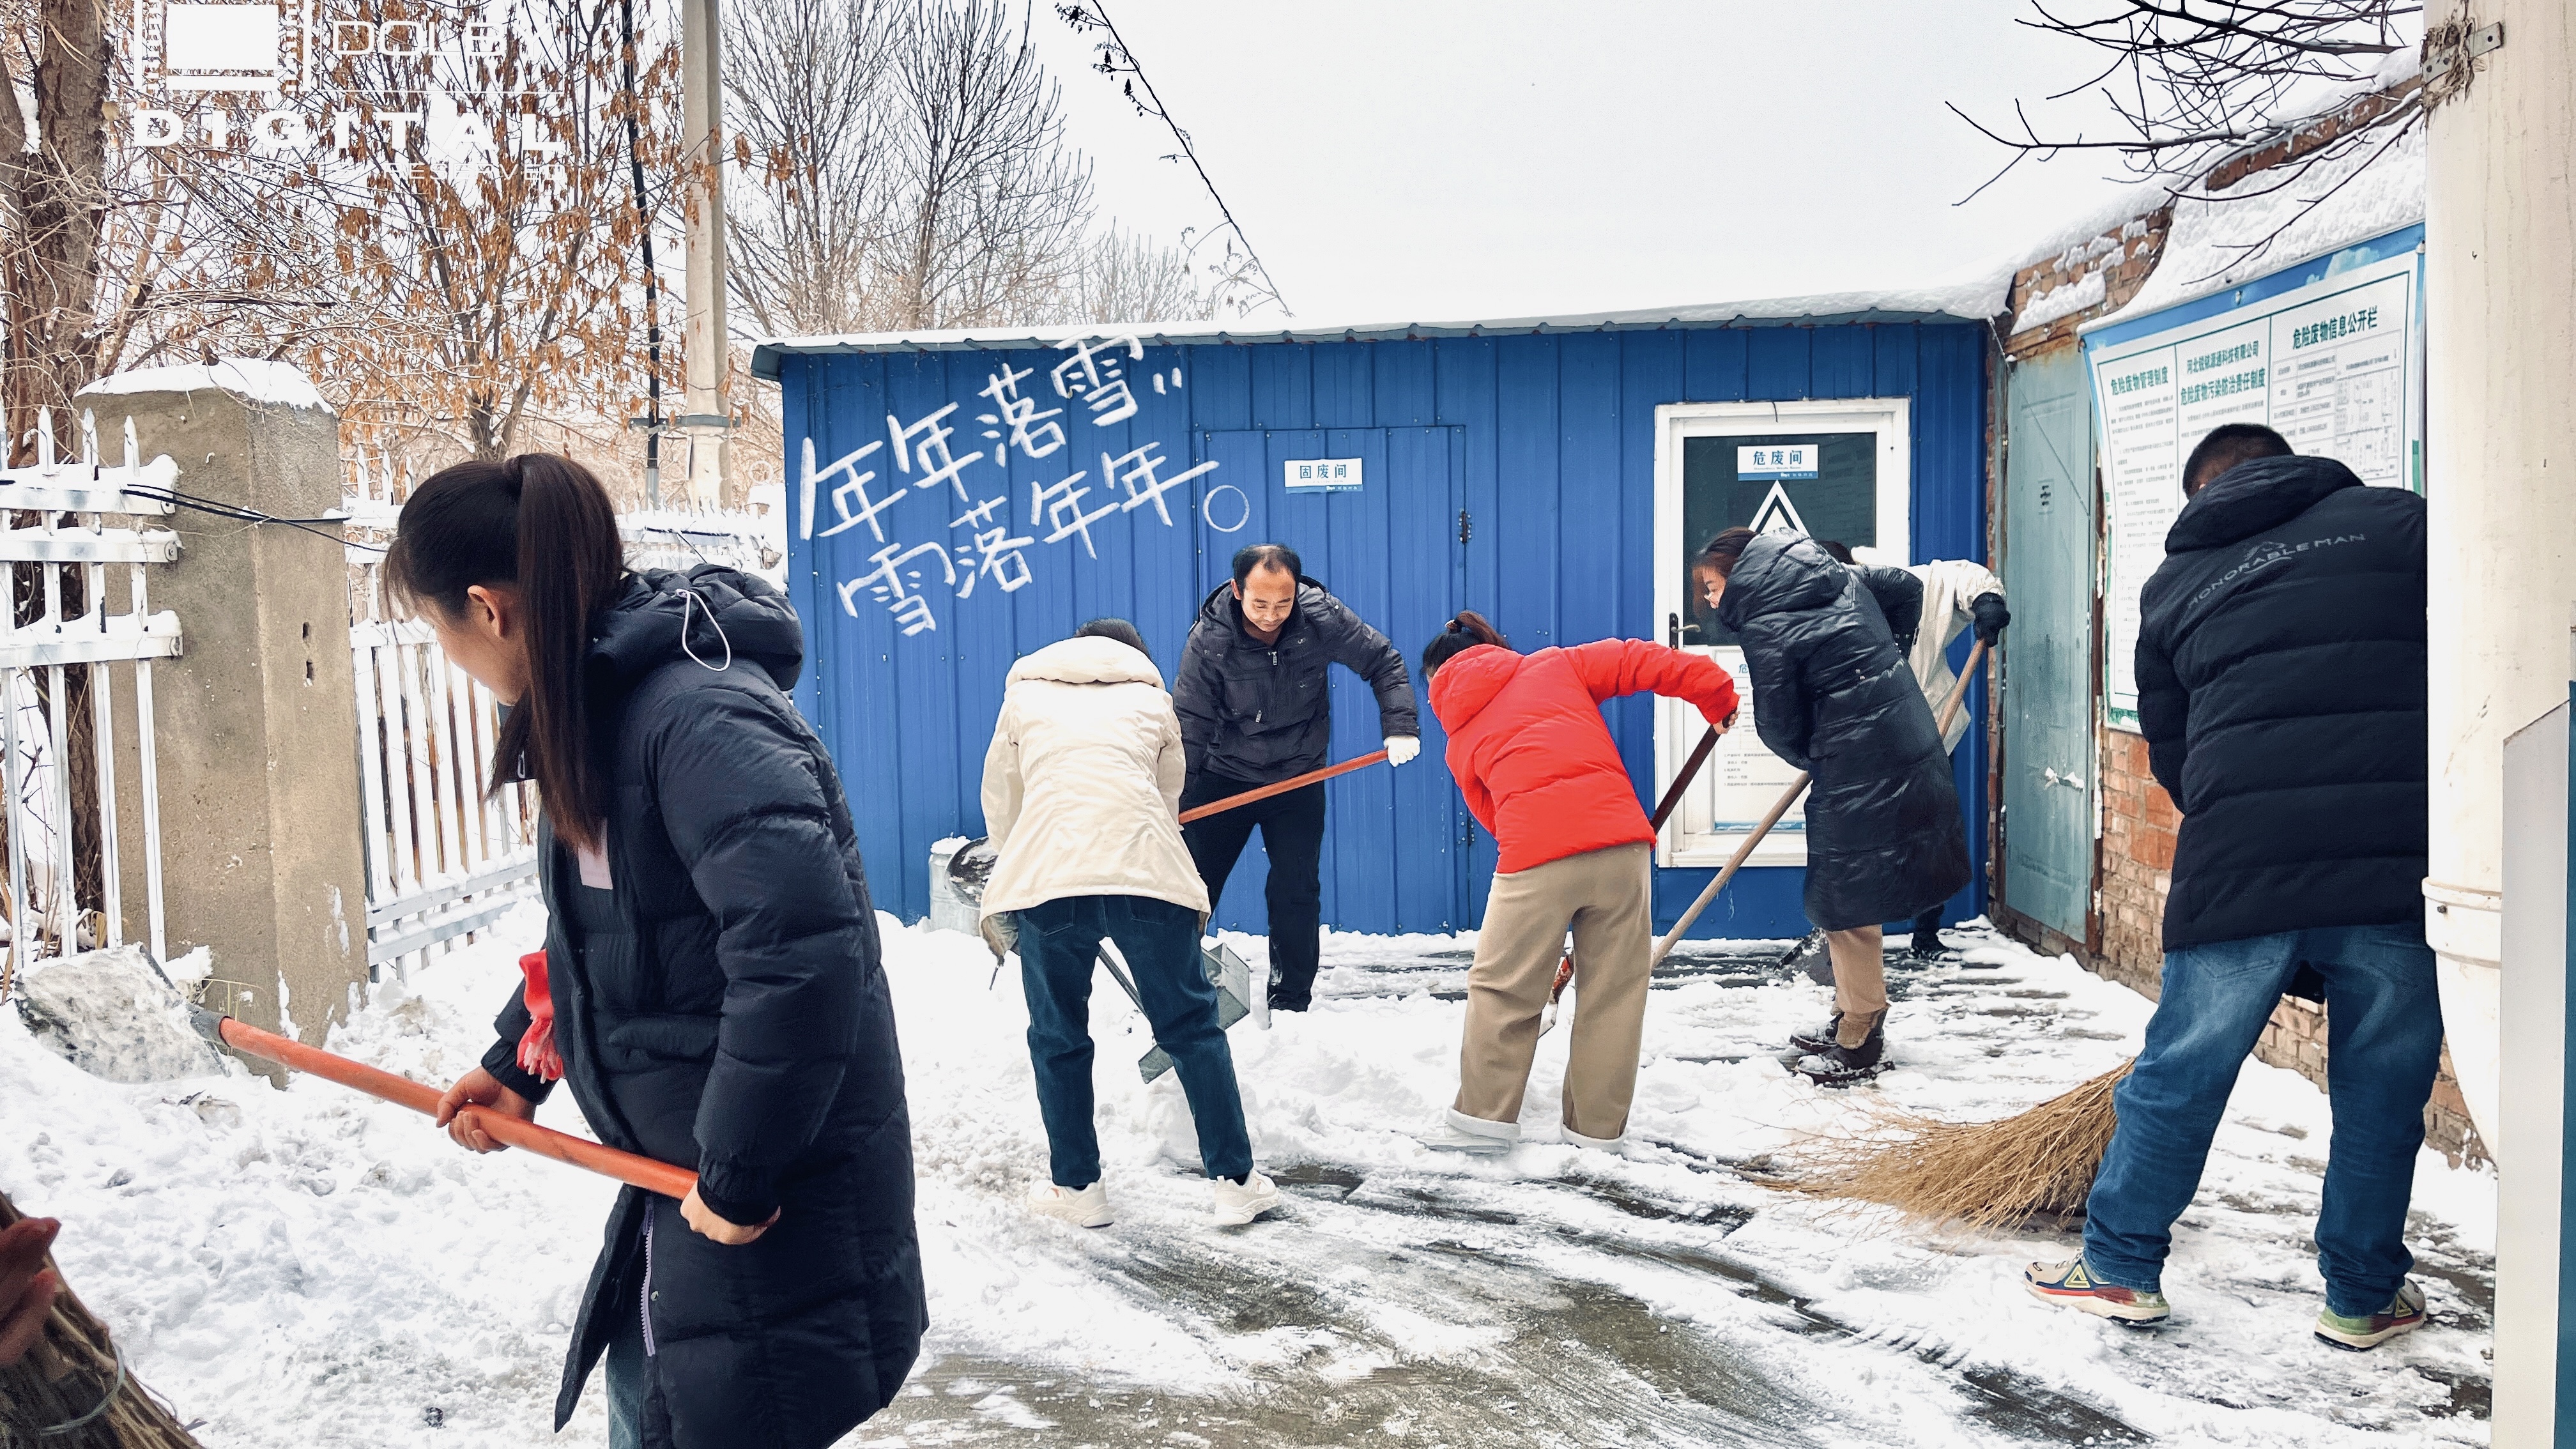 Sweeping snow to ensure smooth traffic, Ruiyi is in action